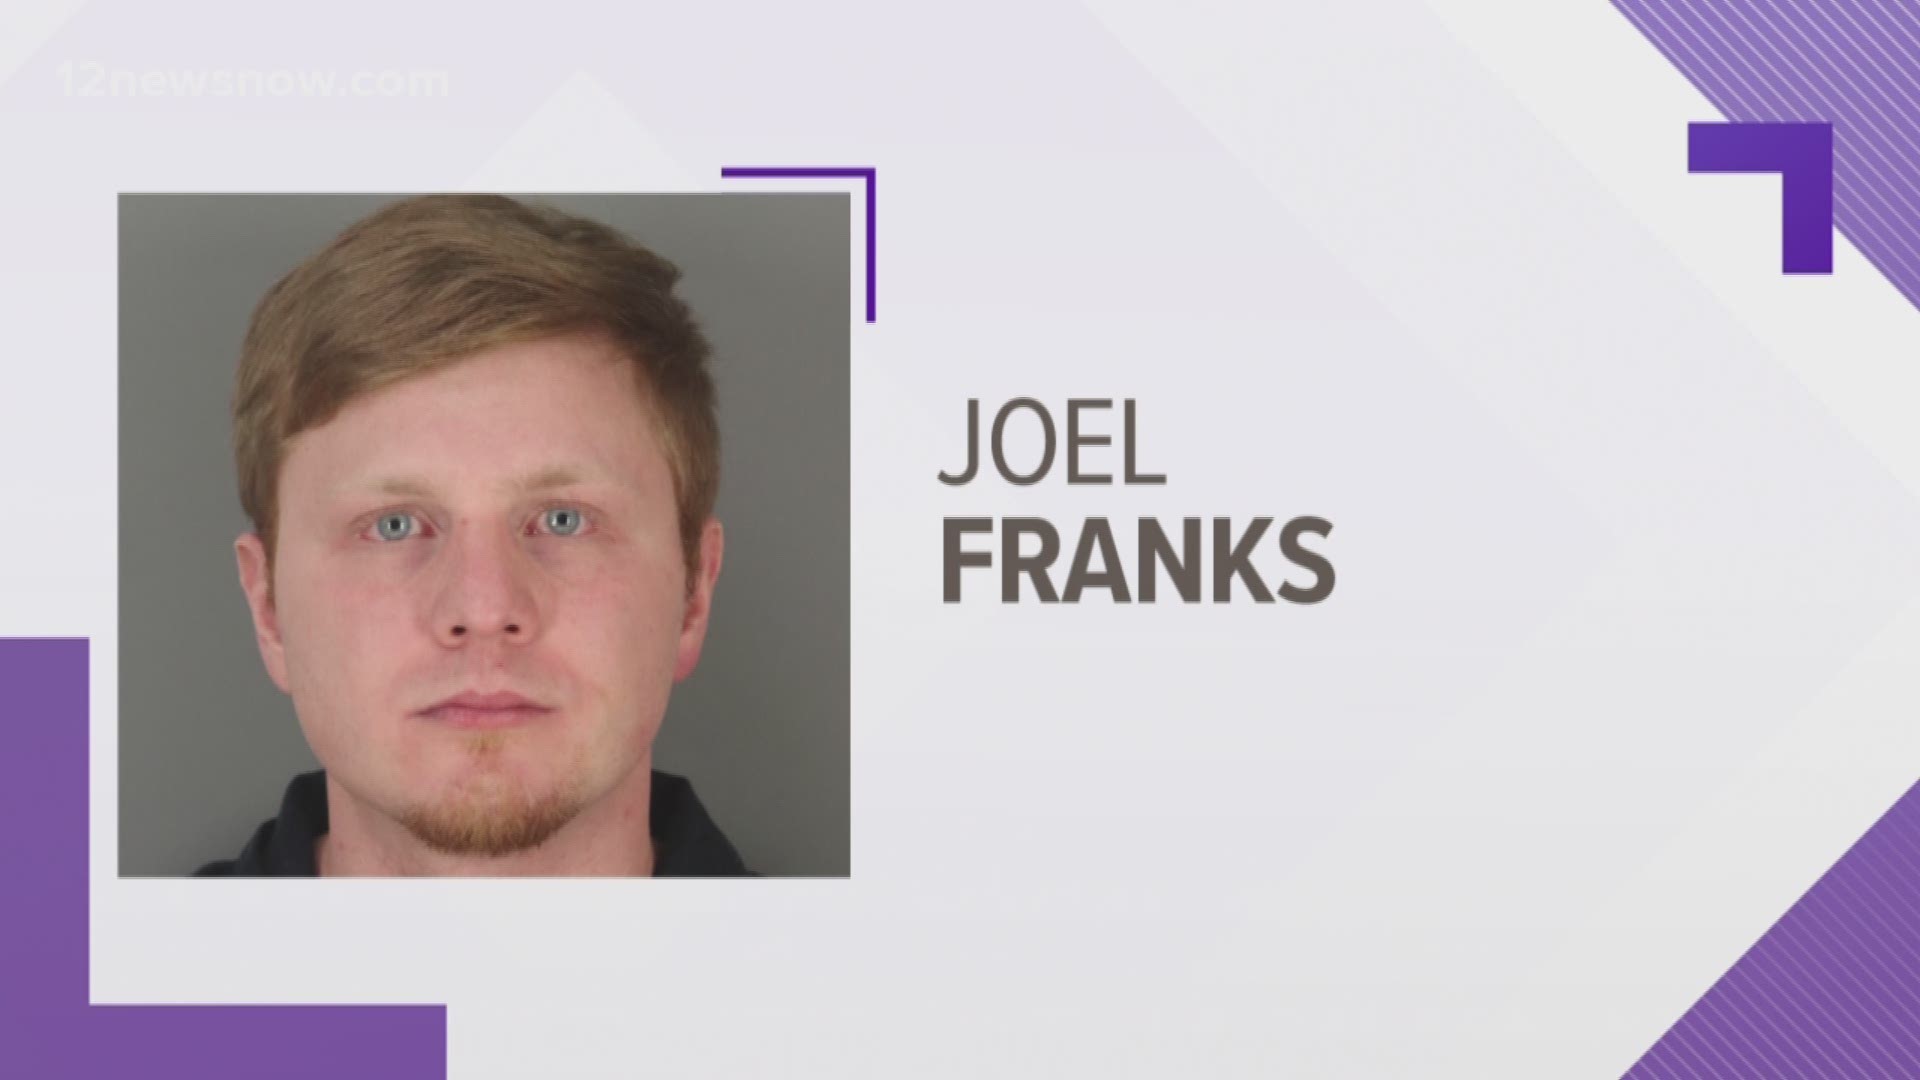 Joel Franks was convicted of robbery